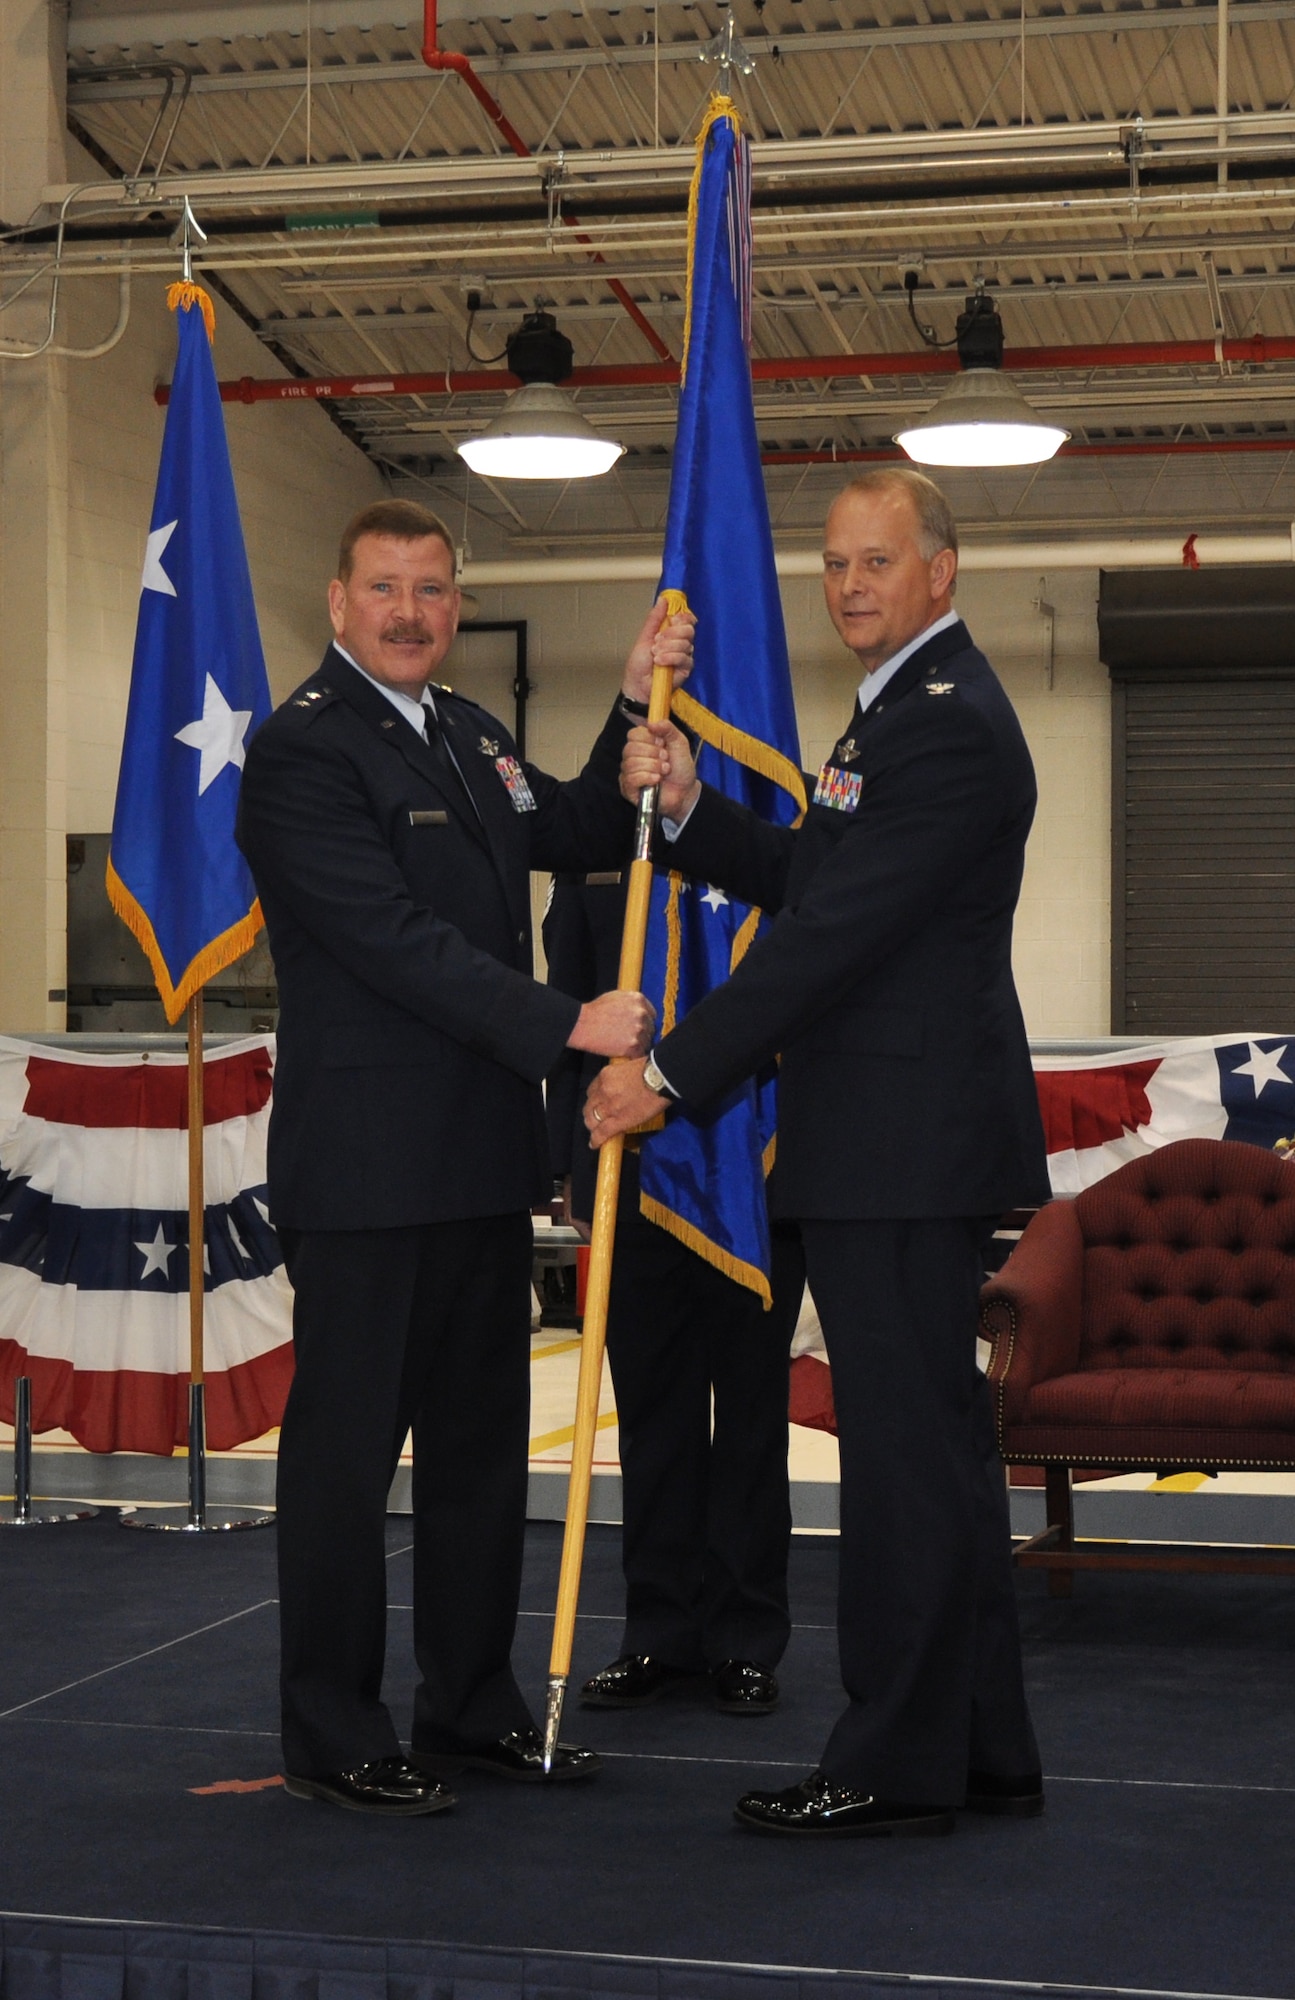 Major General Mark Kyle, 22nd Air Force Commander, passes the flag to Colonel Steven B. Parker during the Change of Command, symbolizing Col. Parker’s assumption of command of the 914th Airlift Wing, March 1, 2014. (U.S. Air Force photo by Staff Sgt. Stephanie Clark) 